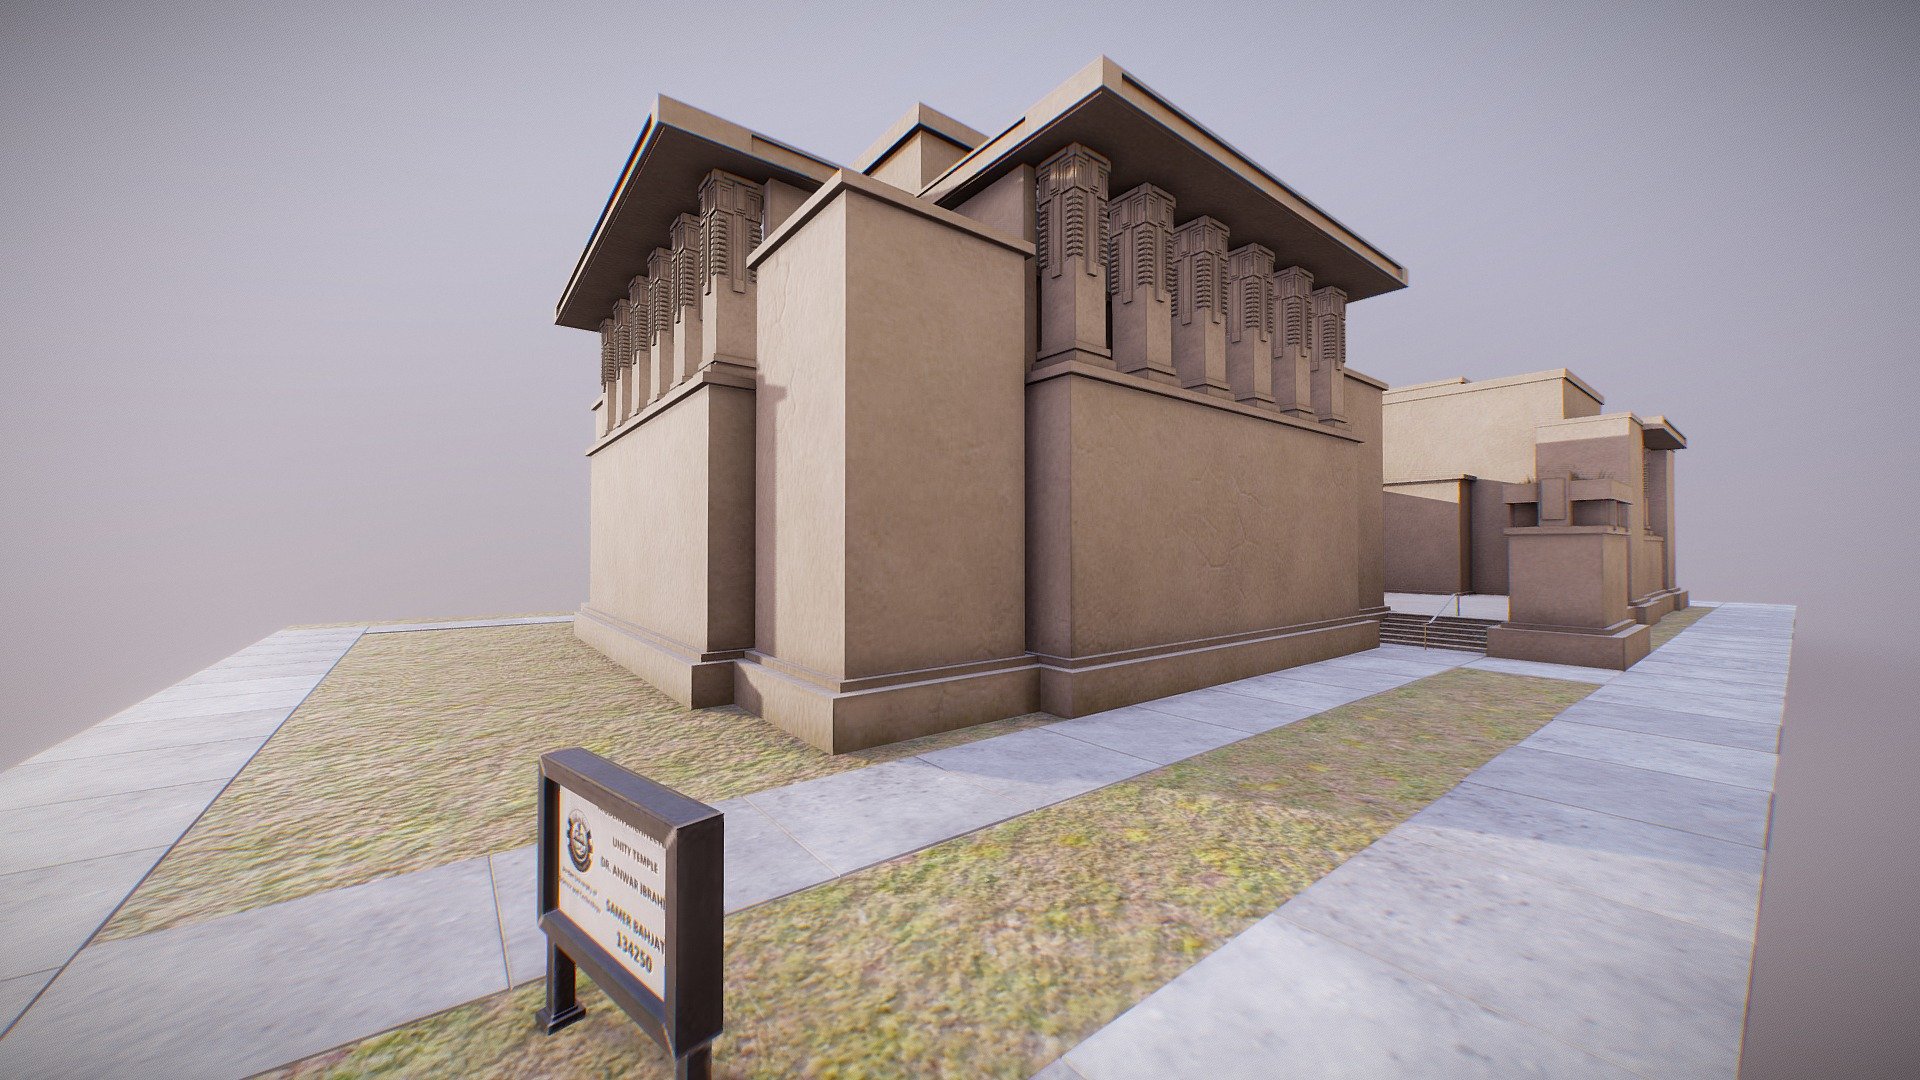 Final Project for modern architecture in the jordanian university of science and technology department of architecture and design
showing a realtime rendering to the unity temple which was designed by frank lloyd wright using pbr materials and optimized geometry

Apps used Blender 3d - Photoshop - substence painter

tutor dr. anwar ibrahim
done by samer bahjat - Unity Temple ( frank lloyd wright ) - Download Free 3D model by Sam_Kasrawi 3d model